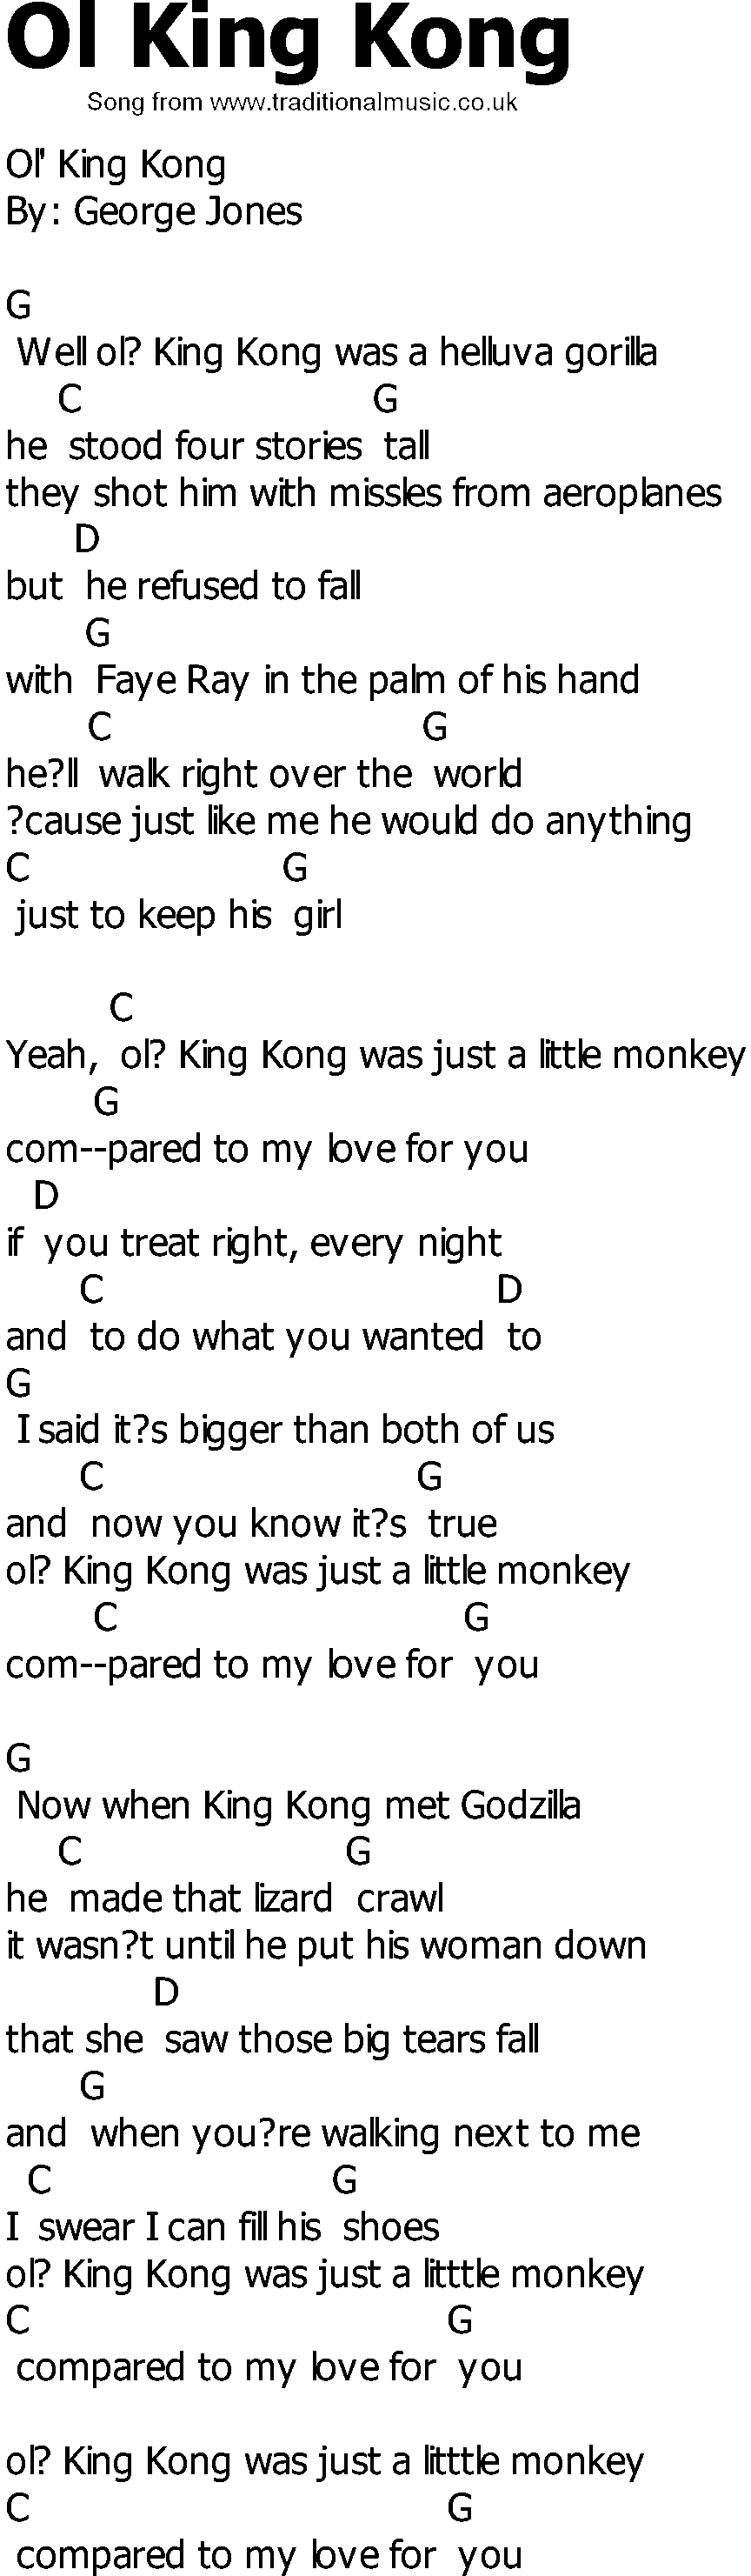 Old Country song lyrics with chords - Ol King Kong